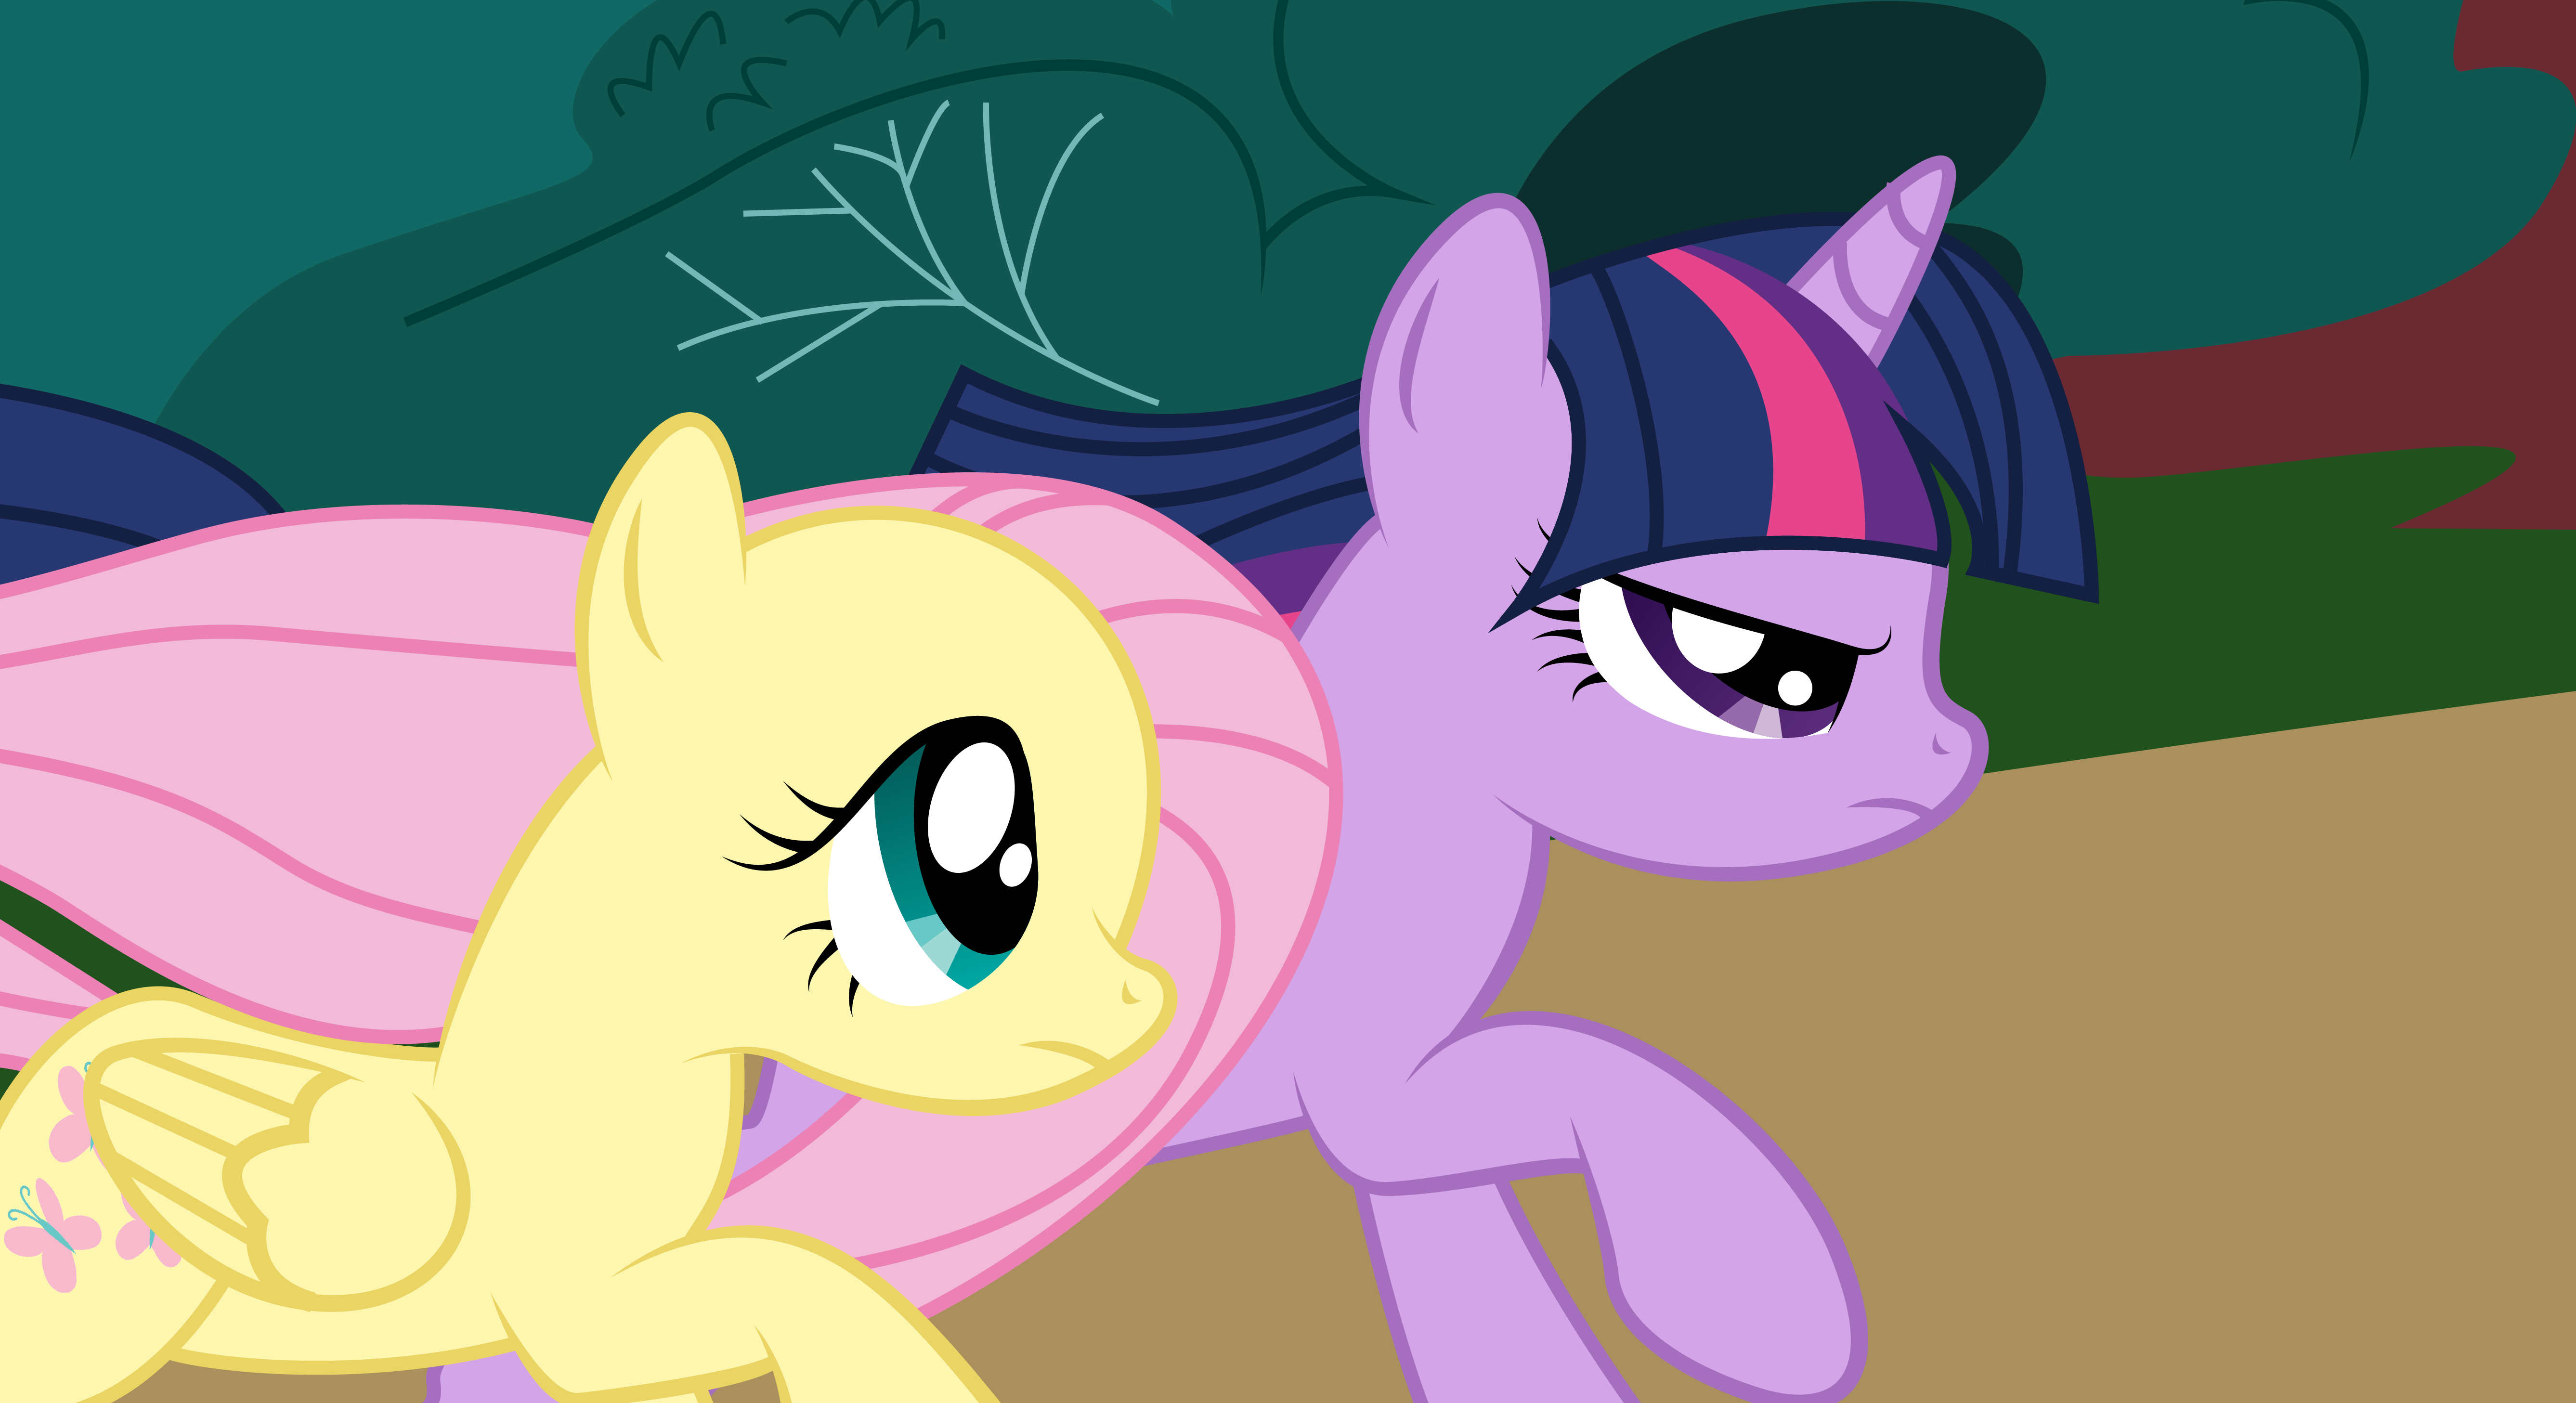 Twilight Sparkle and Fluttershy sing by Tardifice on 